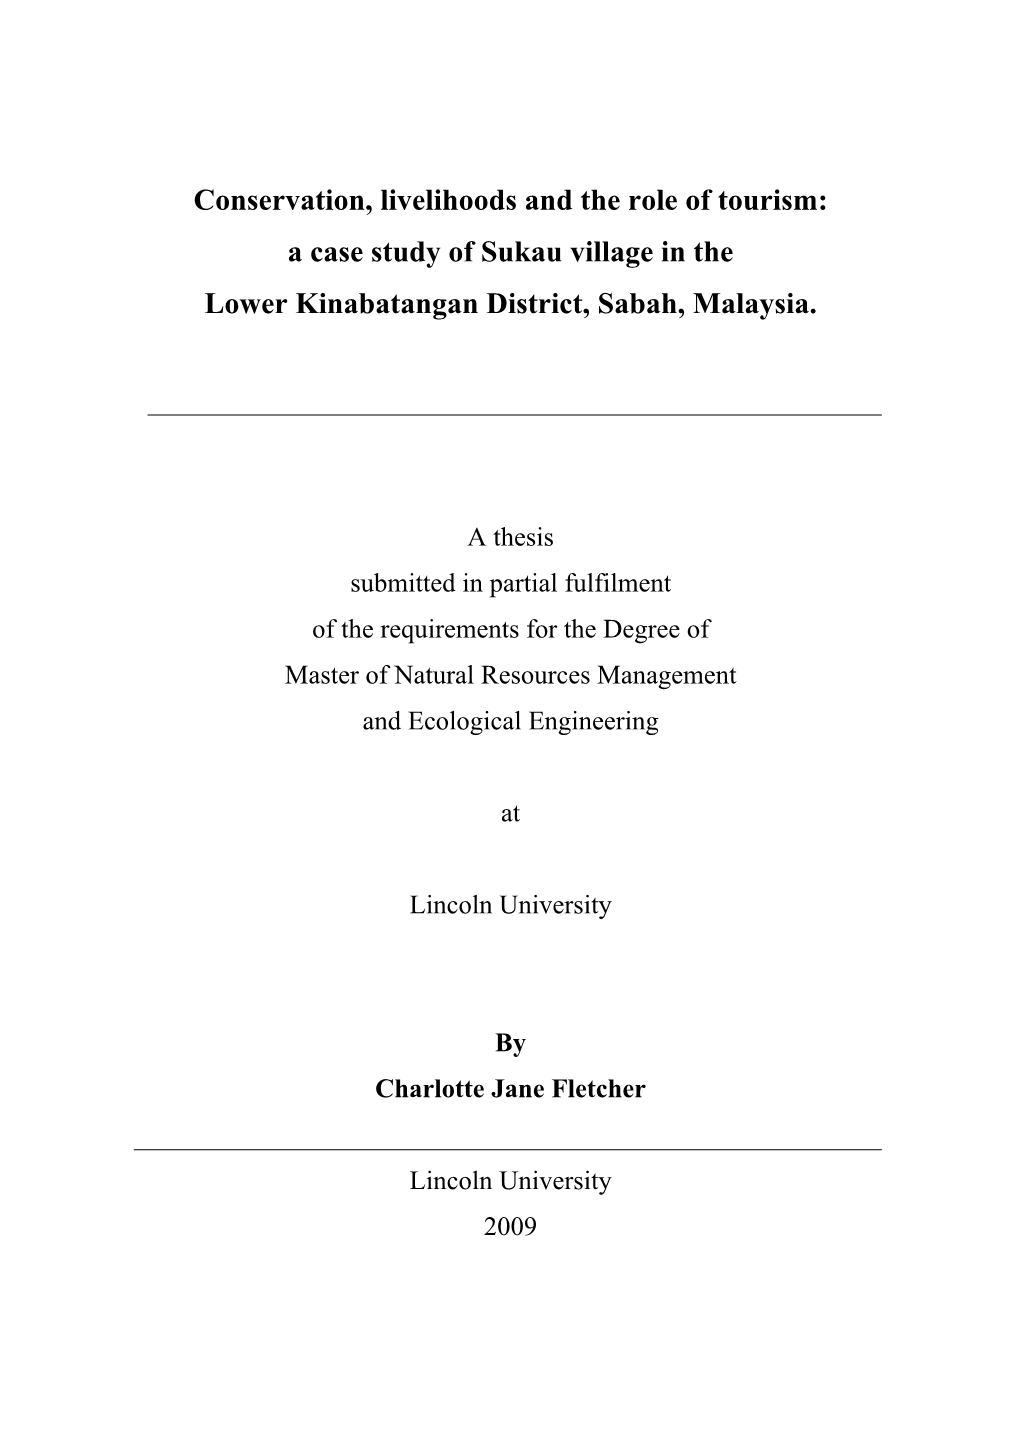 A Case Study of Sukau Village in the Lower Kinabatangan District, Sabah, Malaysia